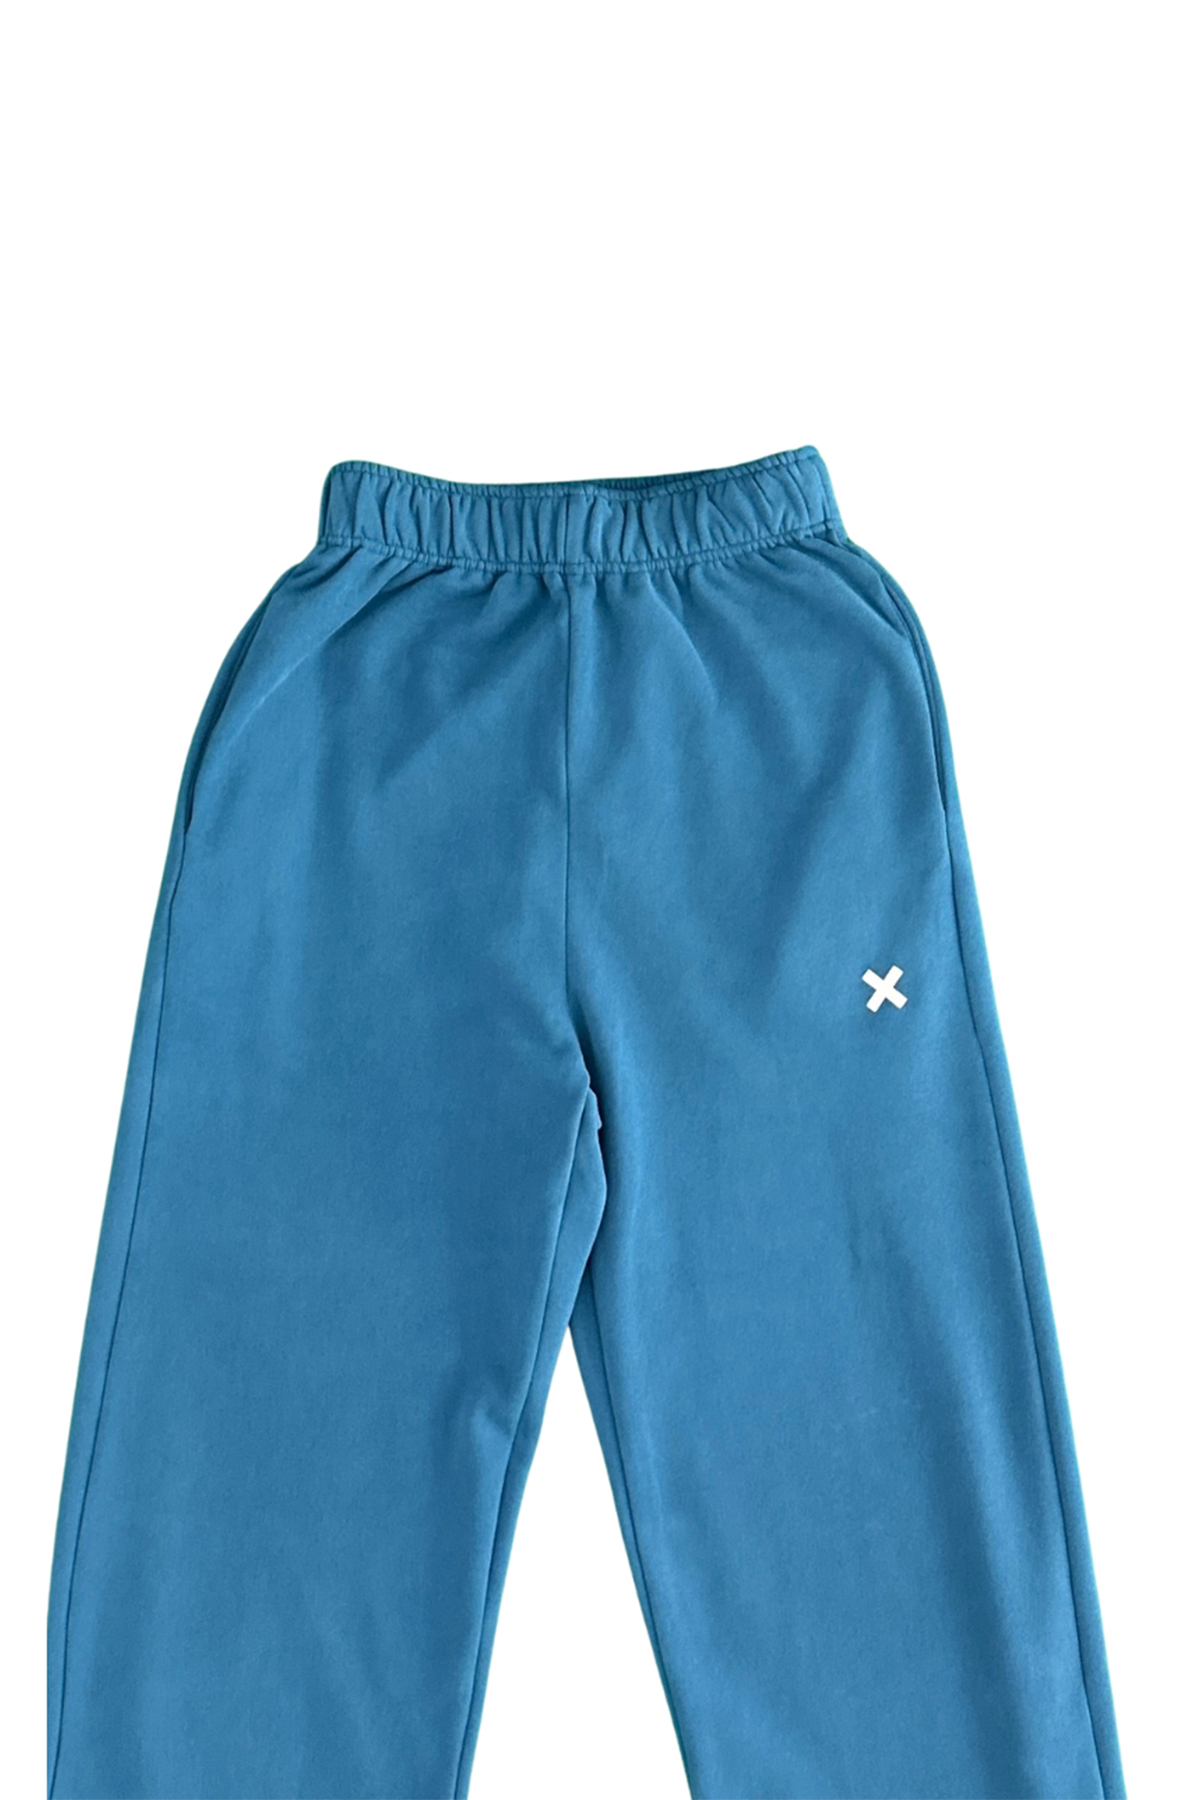 Time-Out-X-Wide-Leg-Fitness-Pants-blue-zoom